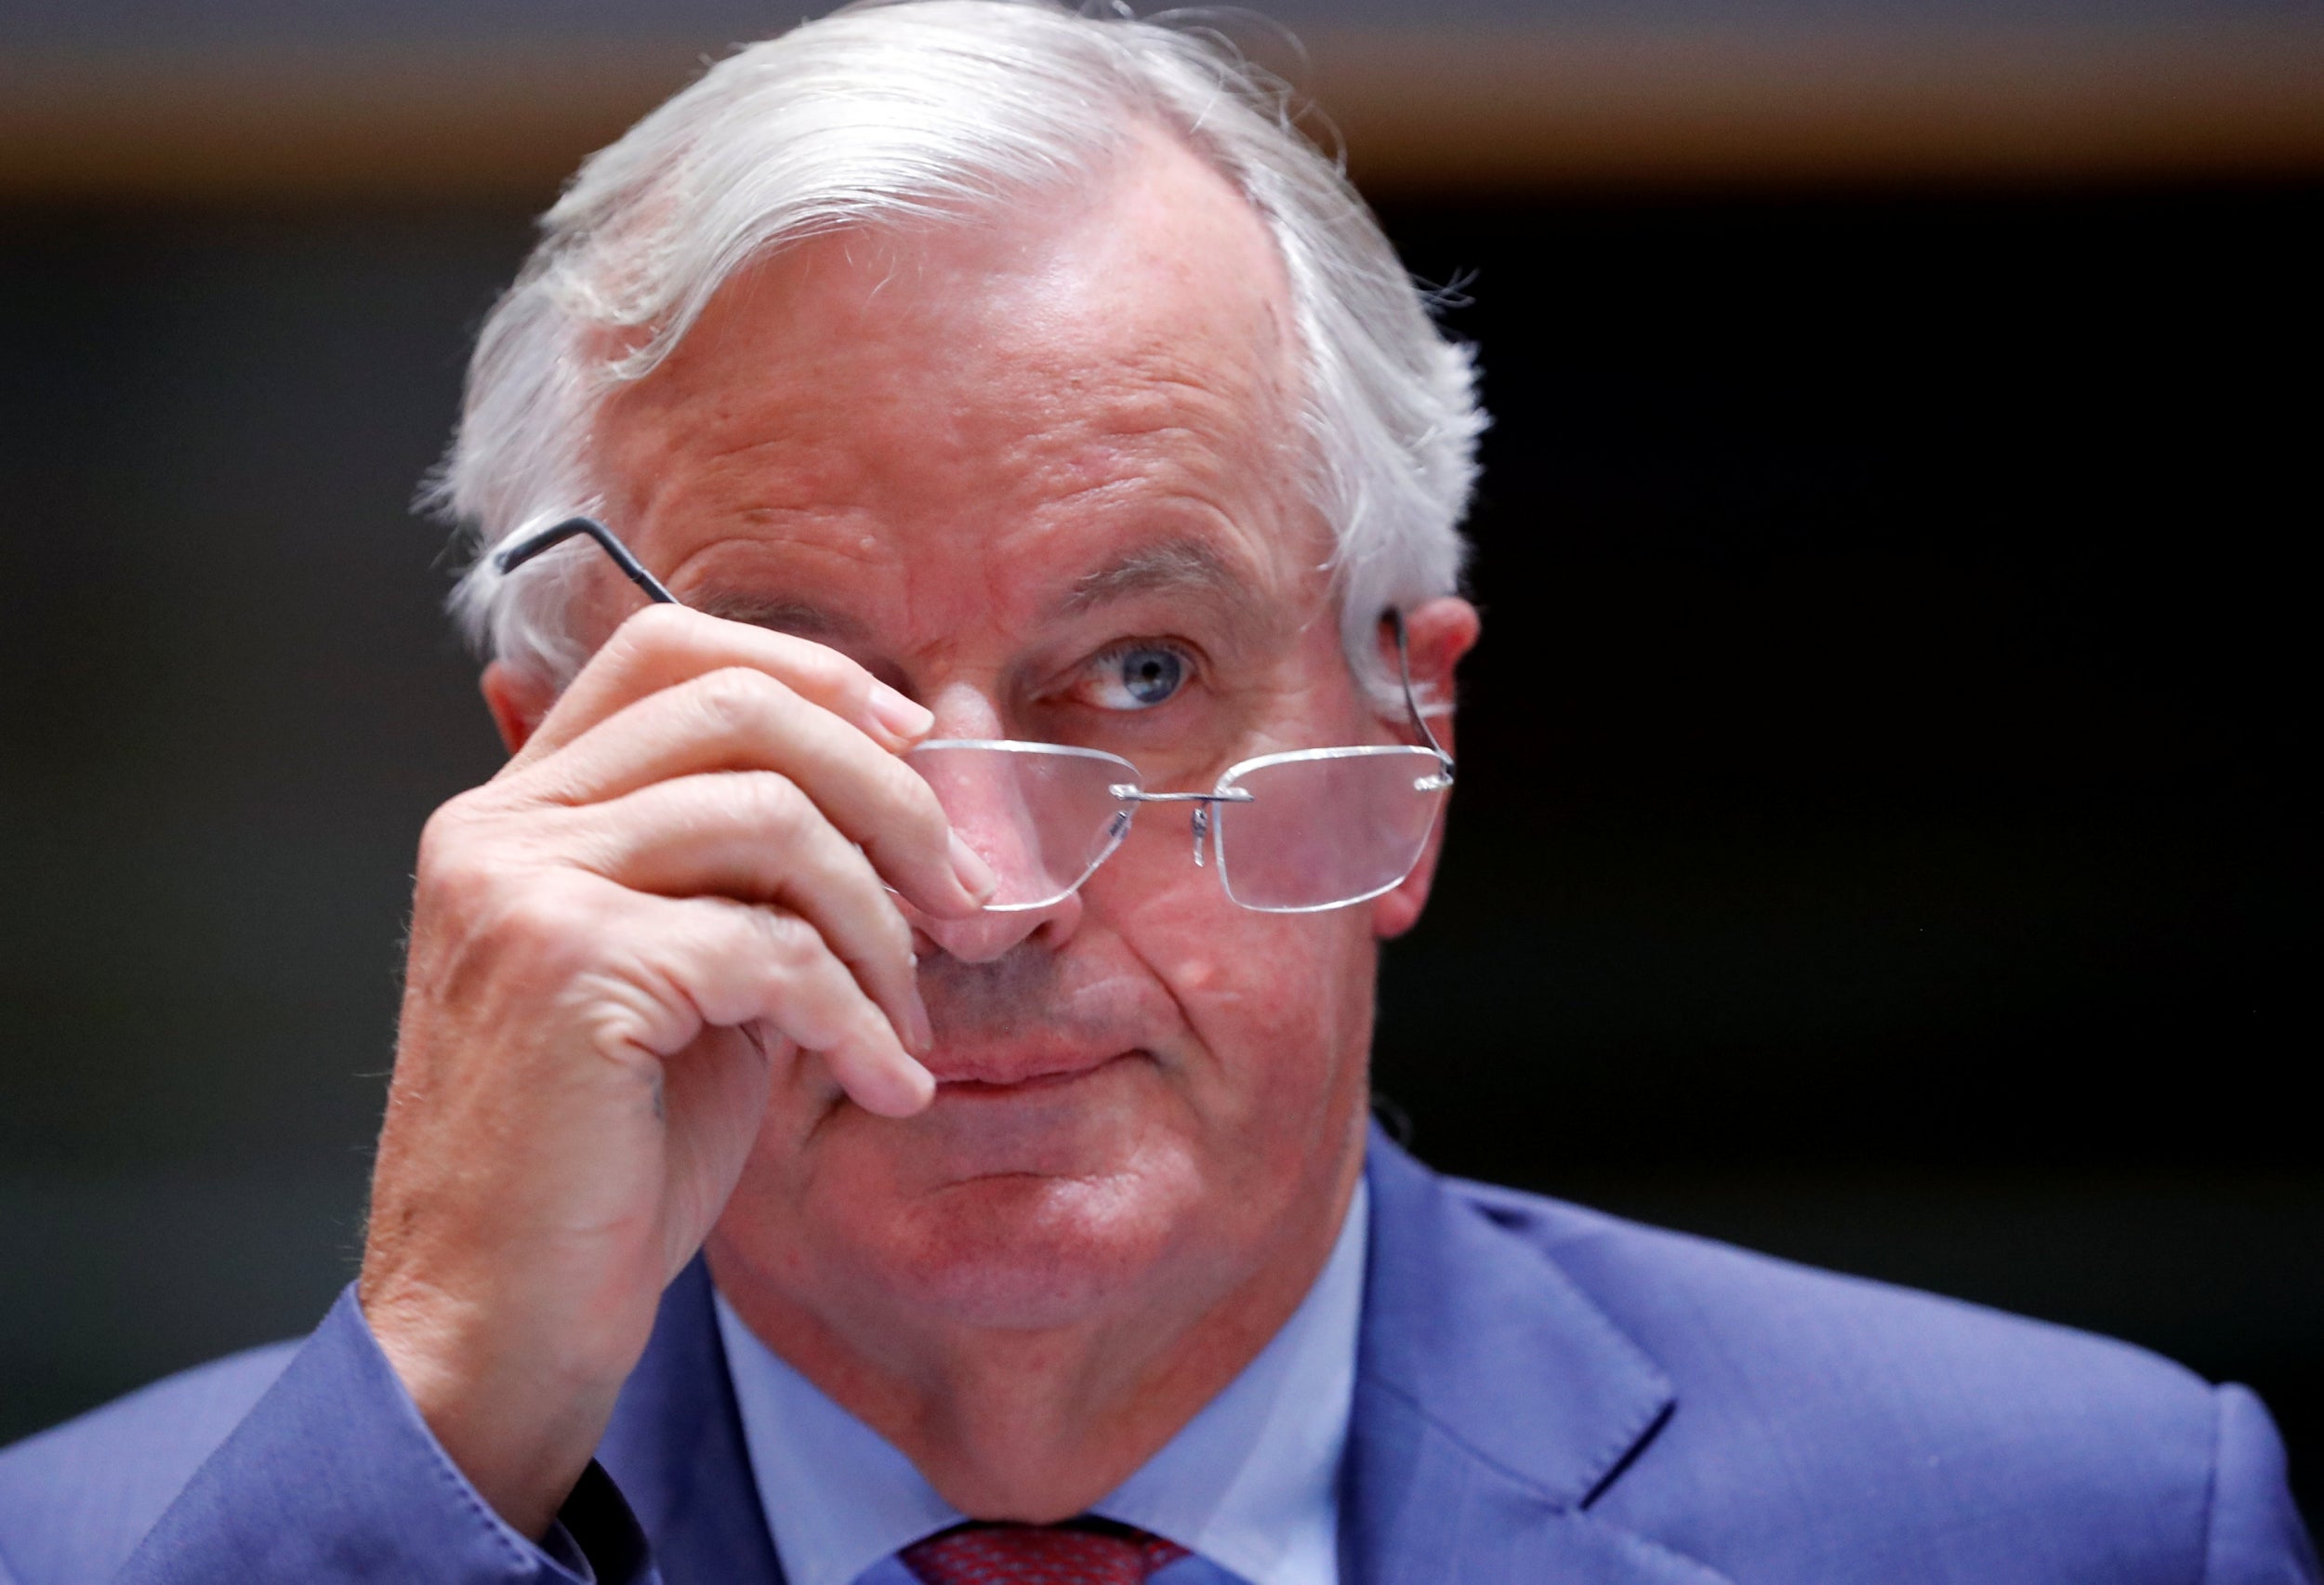 EU chief negotiator Michel Barnier has repeatedly held meetings with the British citizens (Reuters)